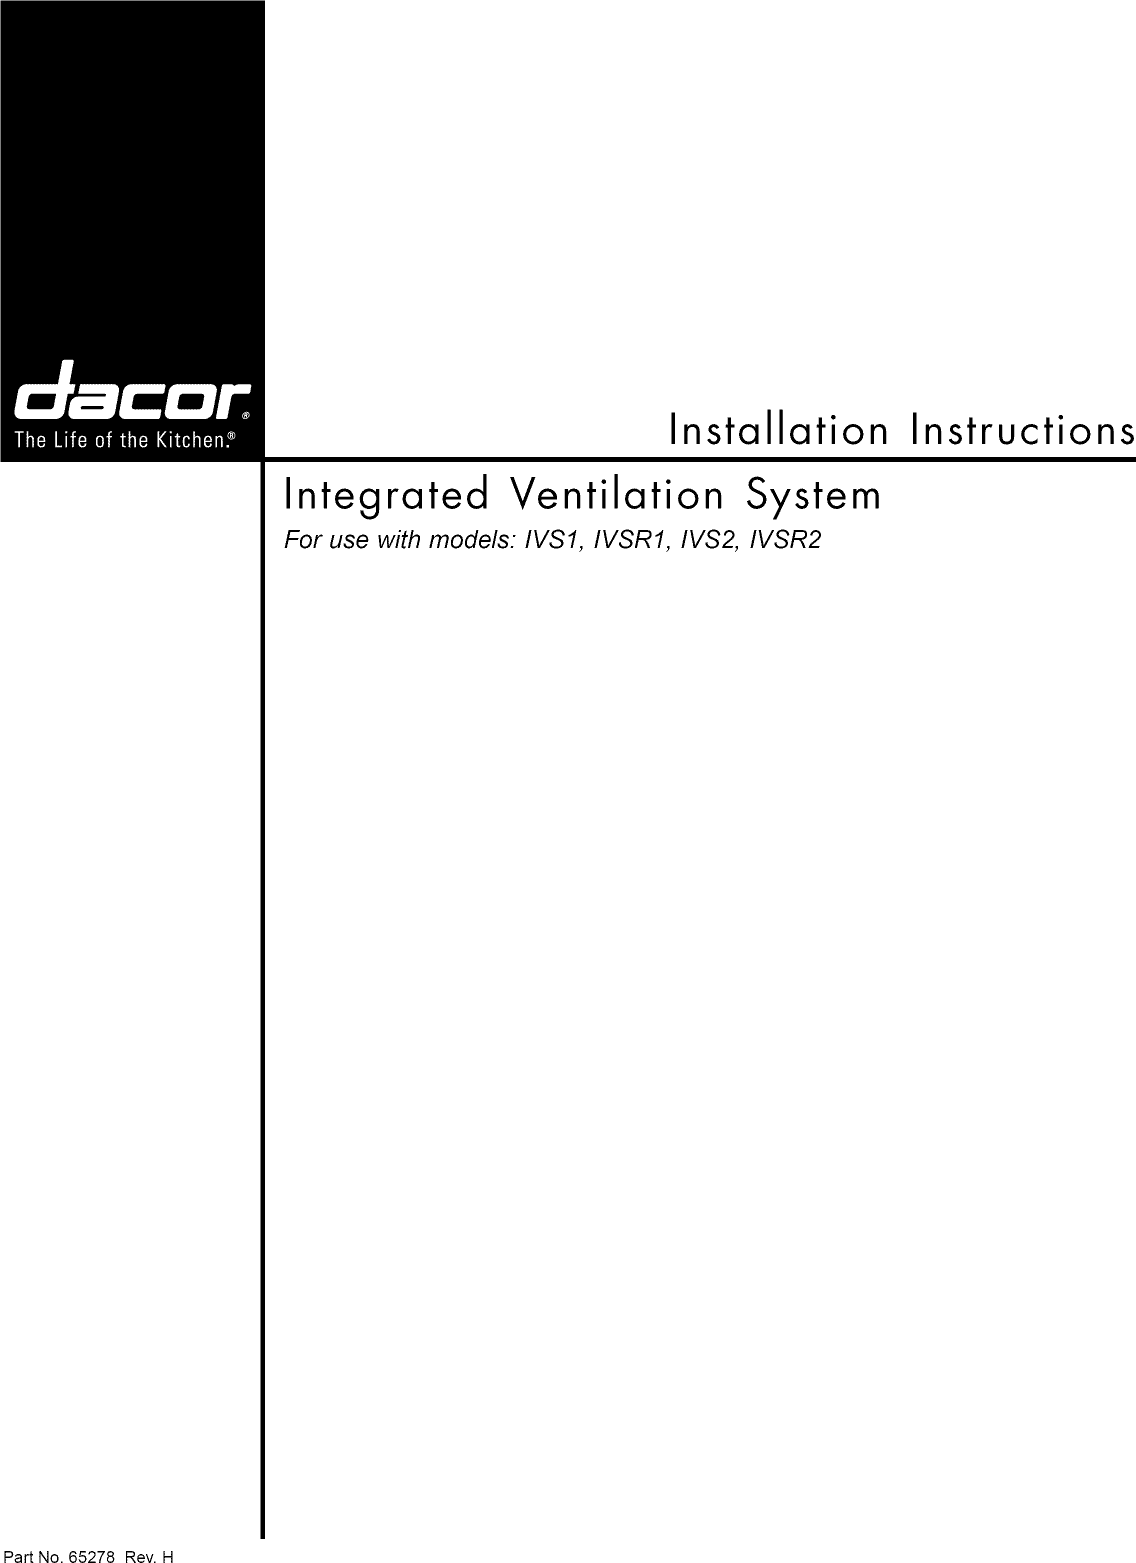 Page 1 of 11 - Dacor IVS2 User Manual  VENT - Manuals And Guides 1102309L